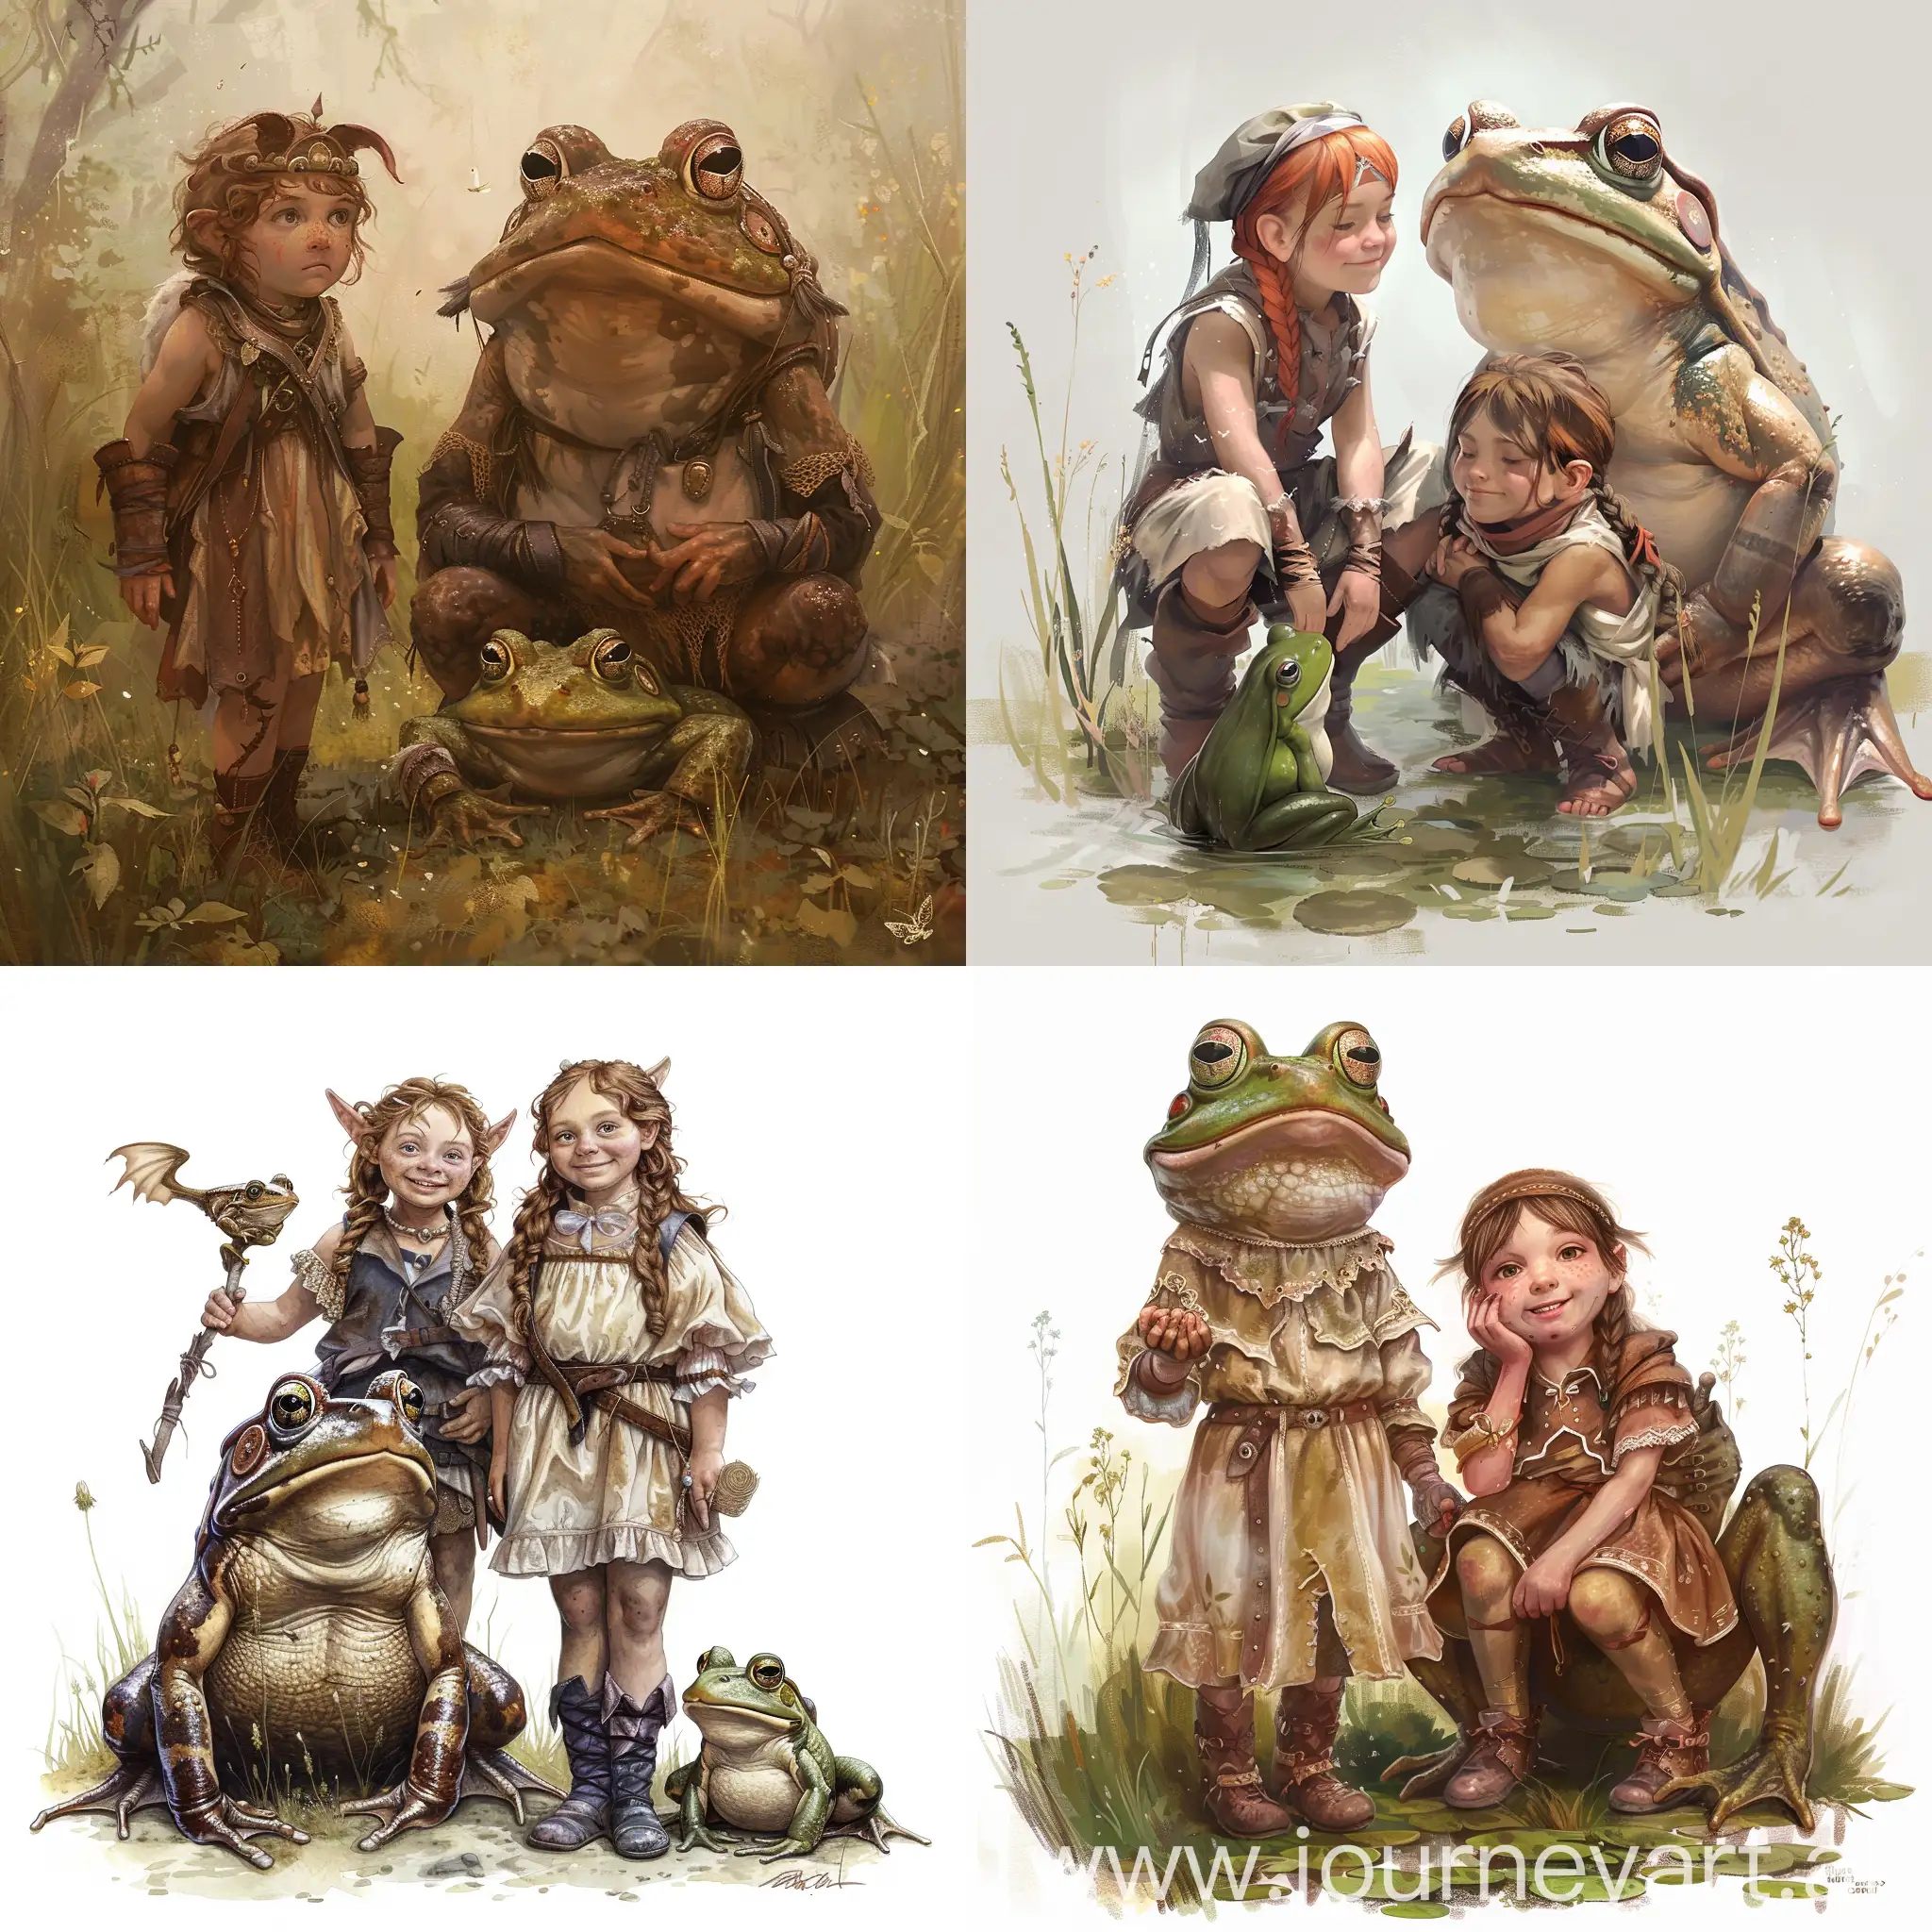 two kid faires, cute fanstasy style, with a large frog companion